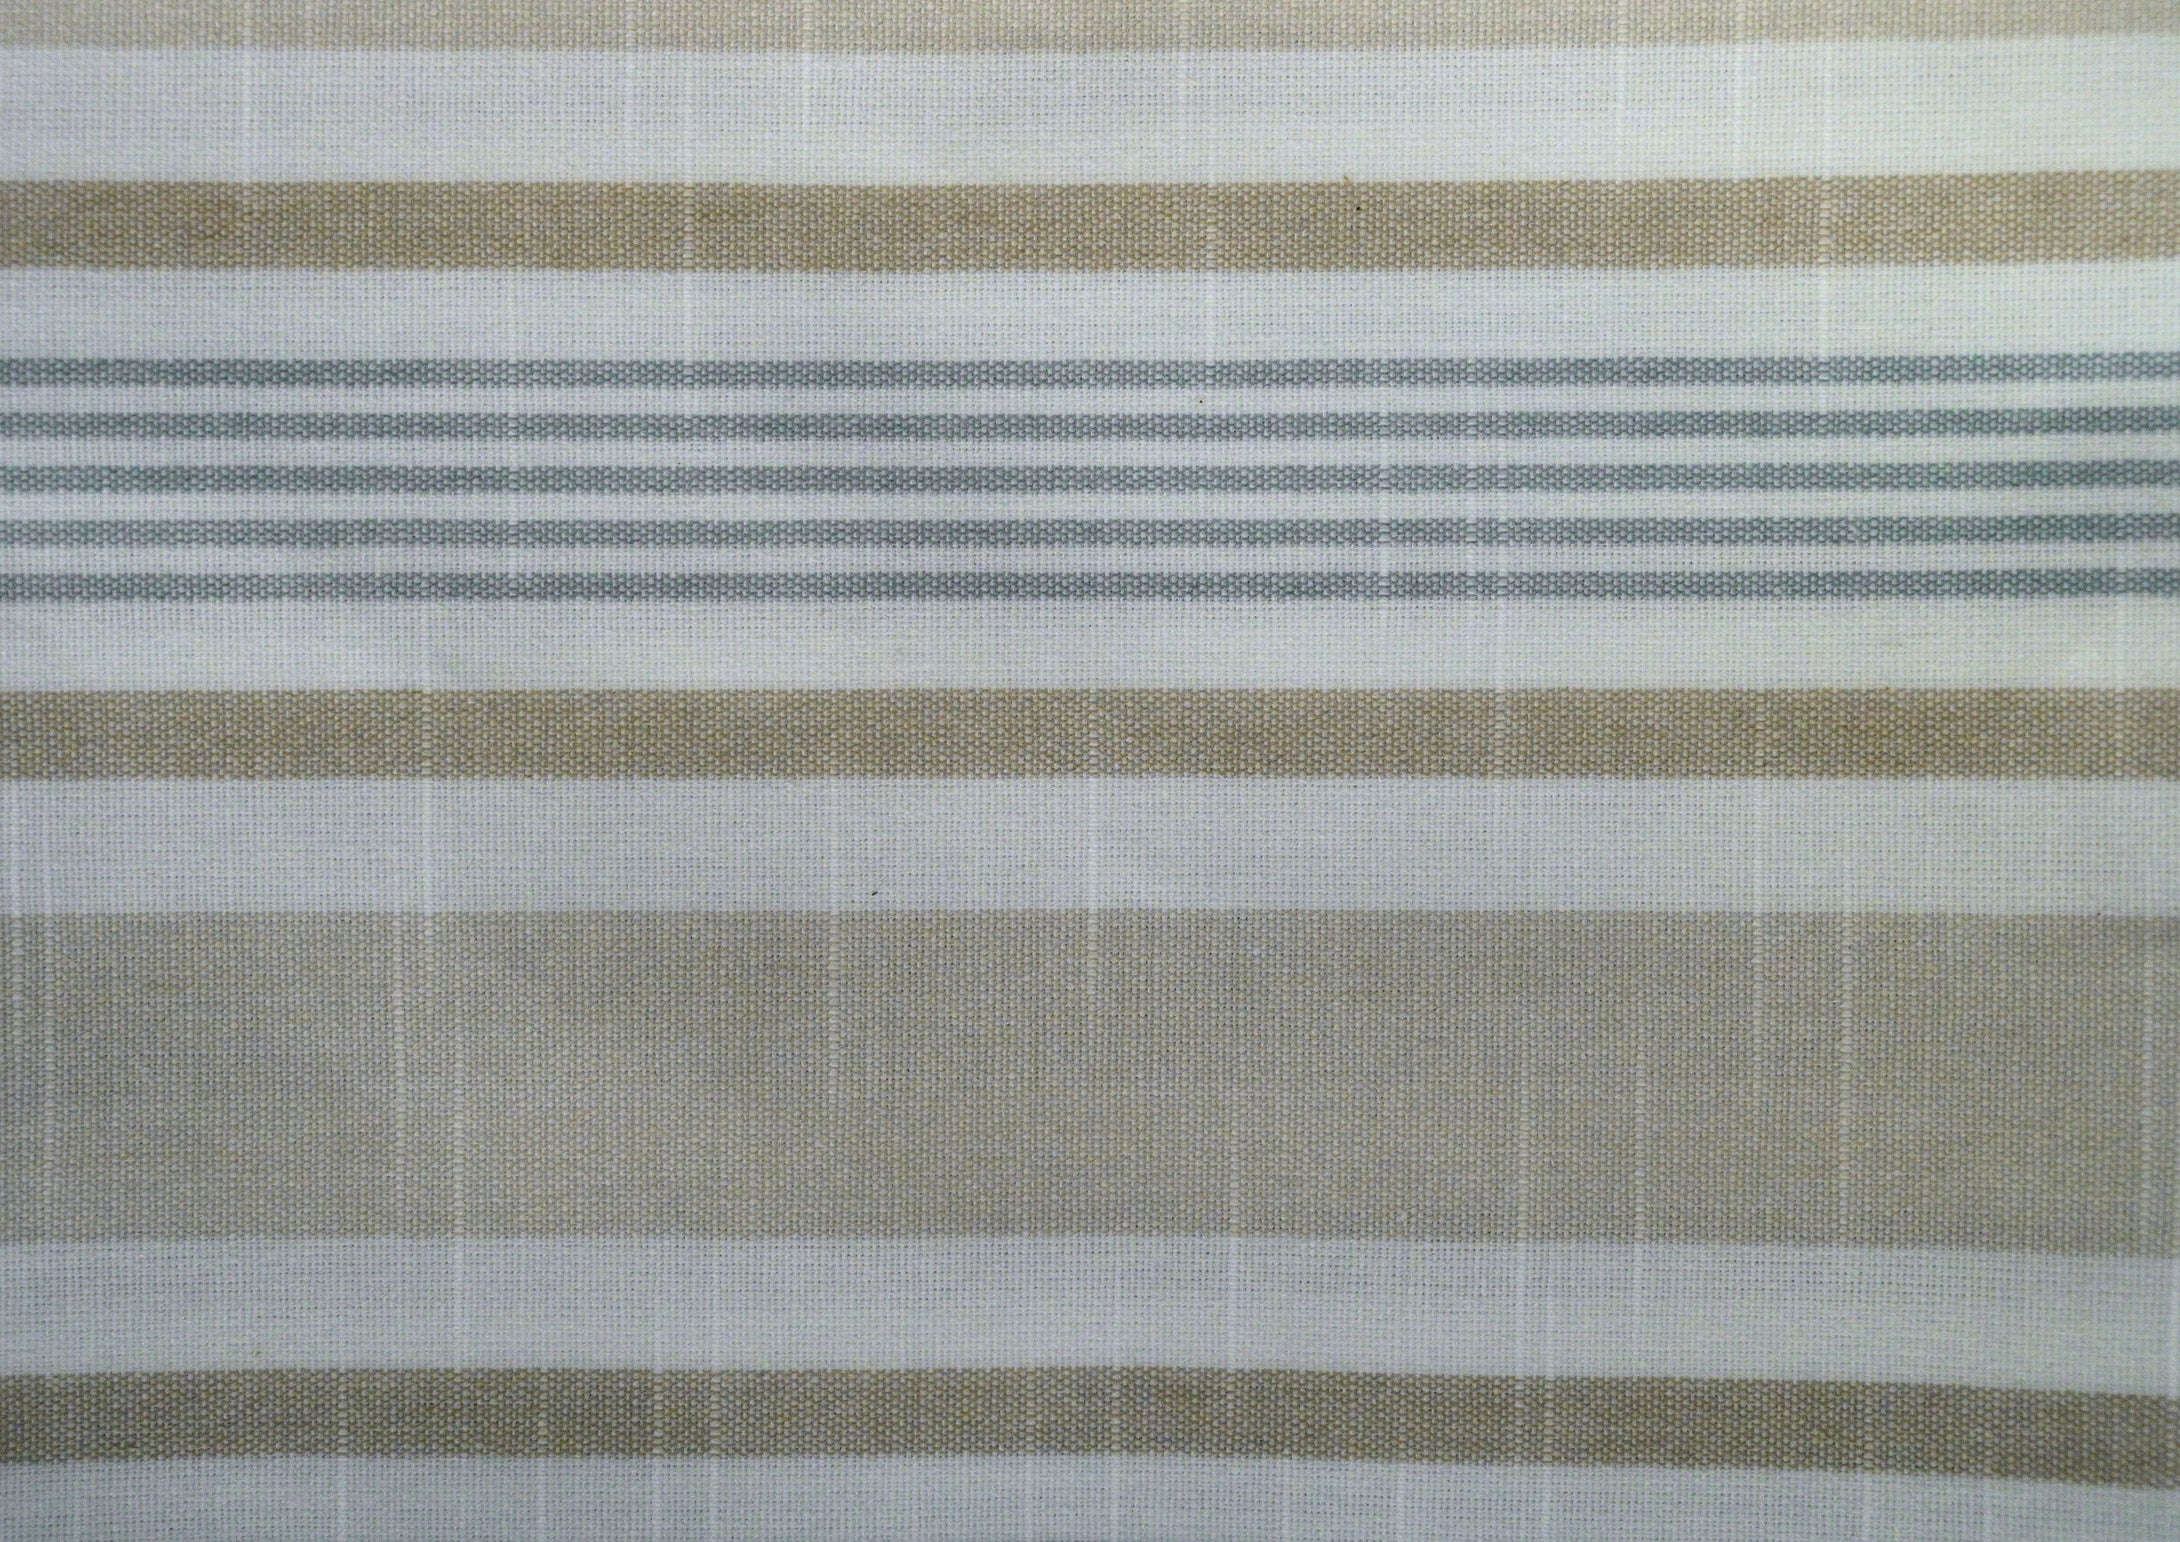 Tablecloth, Striped in 5 sizes, Wipe Clean material